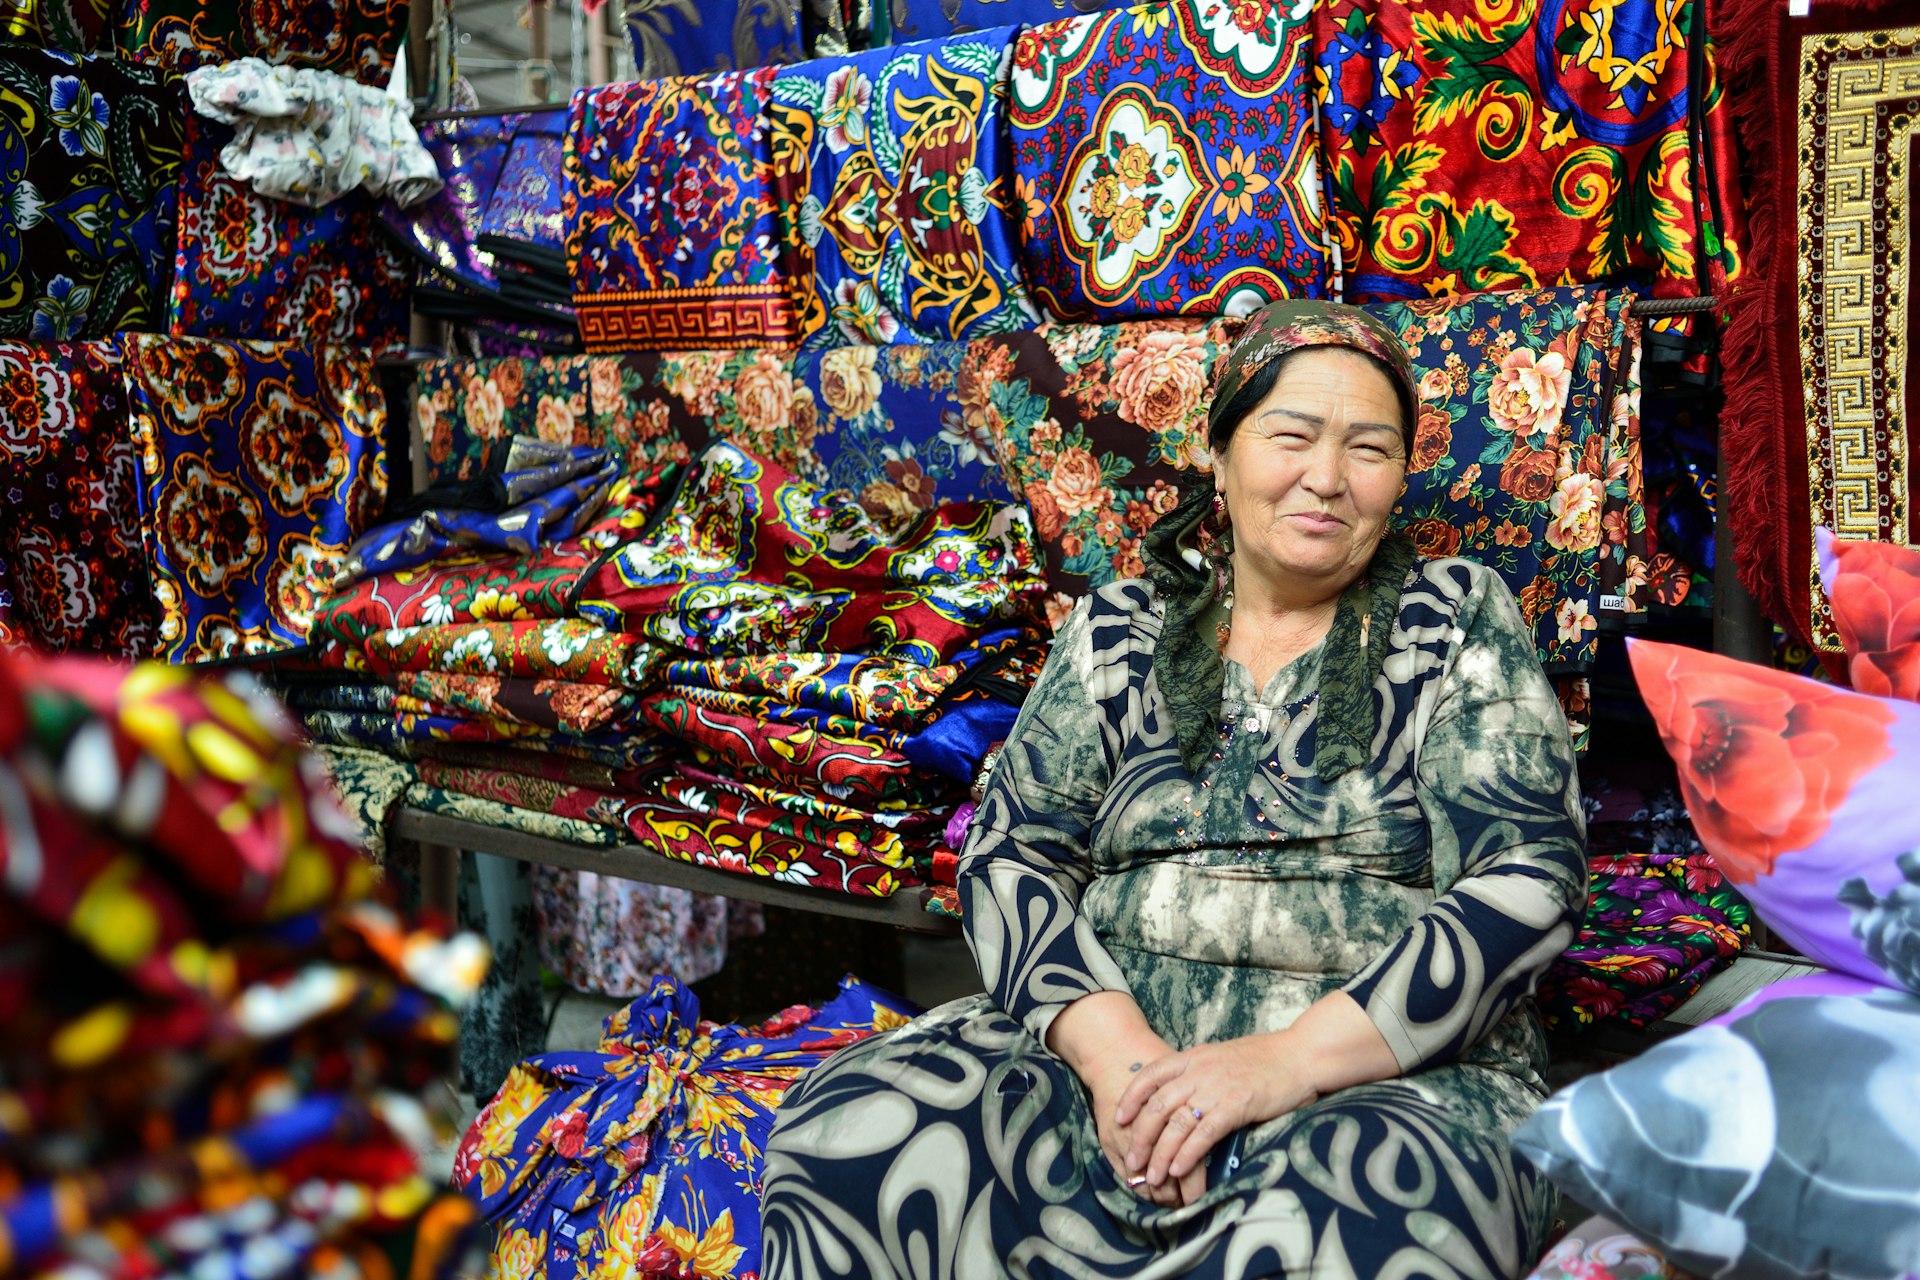 An Uzbek woman selling clothes in a market smiles at the camera